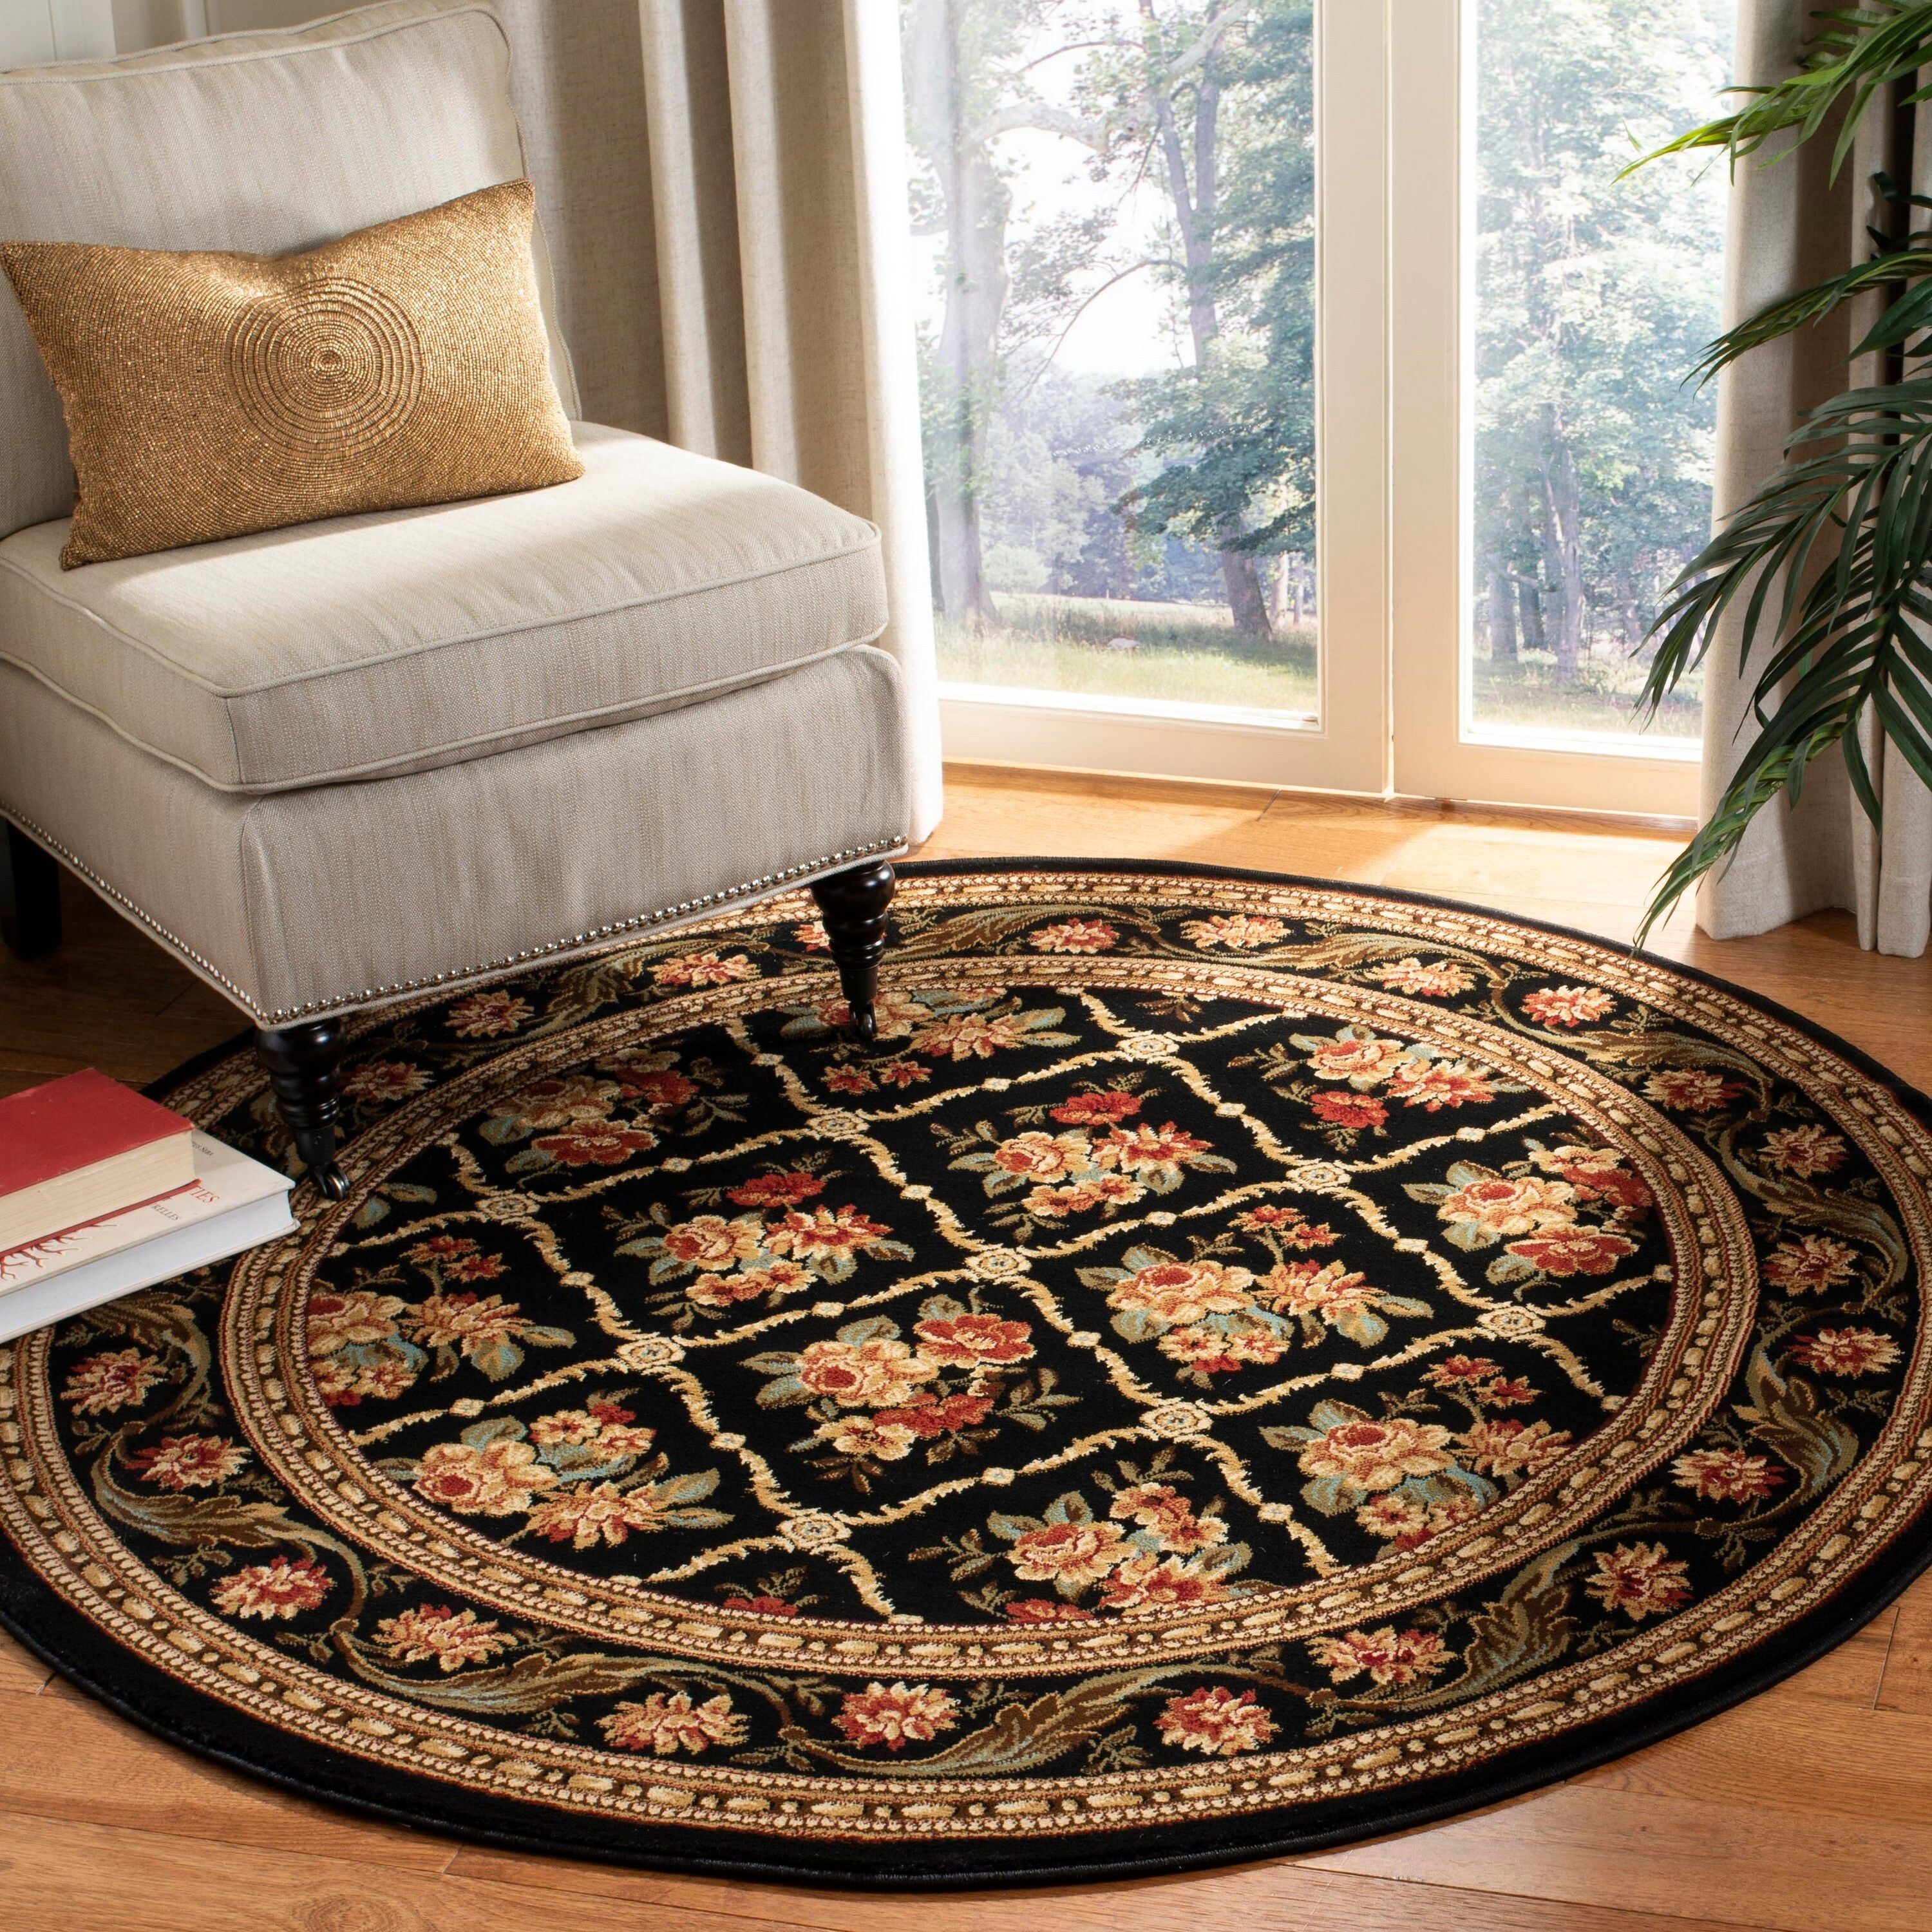 Safavieh Lyndhurst Floral Lattice 5 X 5 Black/black Round Indoor  Floral/botanical Farmhouse/cottage Area Rug In The Rugs Department At  Lowes With Lattice Indoor Rugs (View 8 of 15)